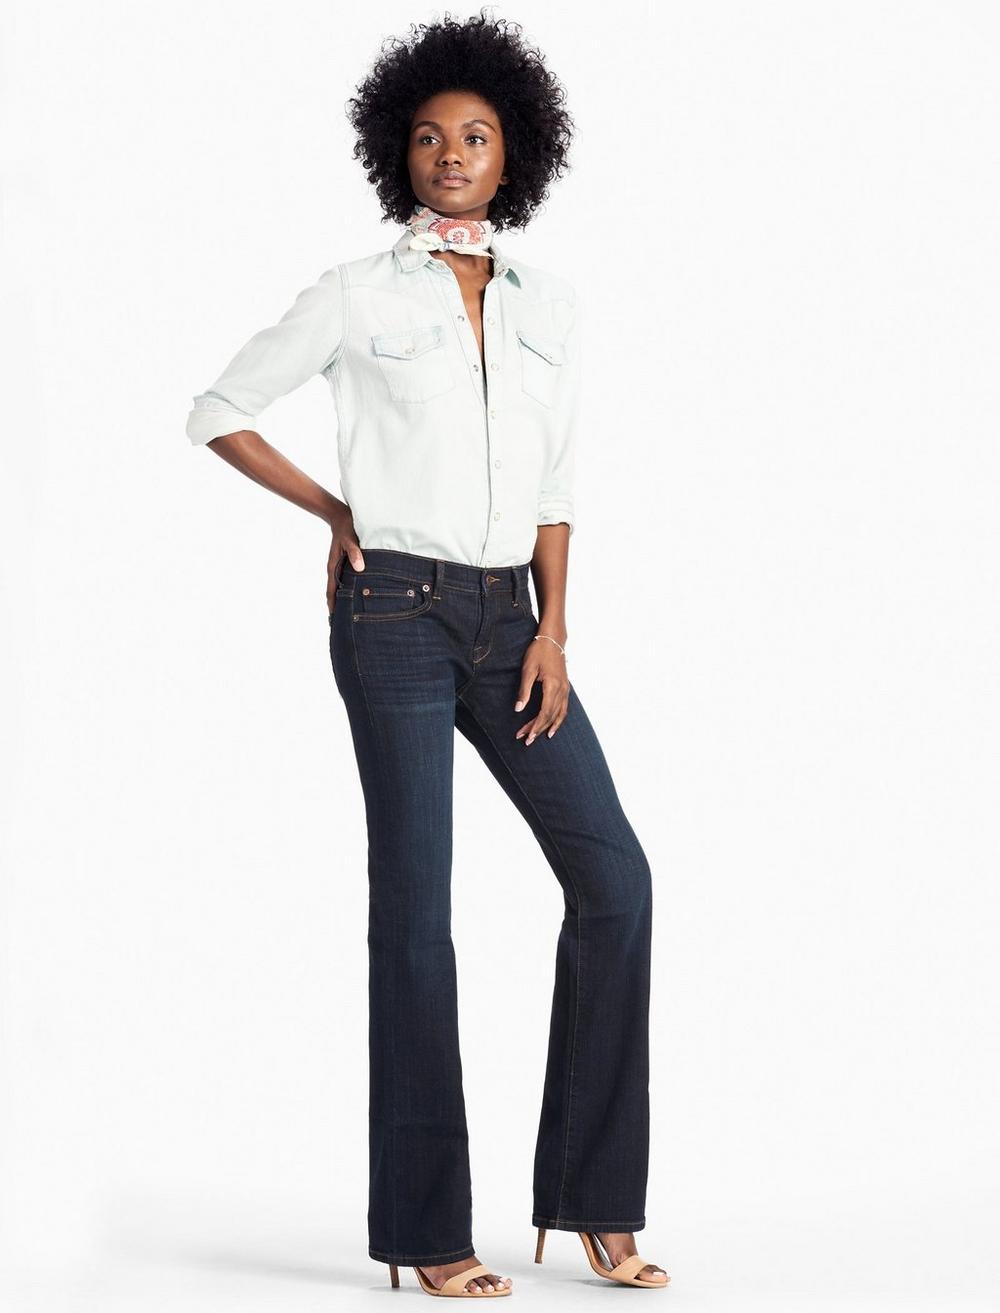 EASY RIDER MID RISE RELAXED BOOTCUT JEAN IN LAGUNA HILLS | Lucky Brand